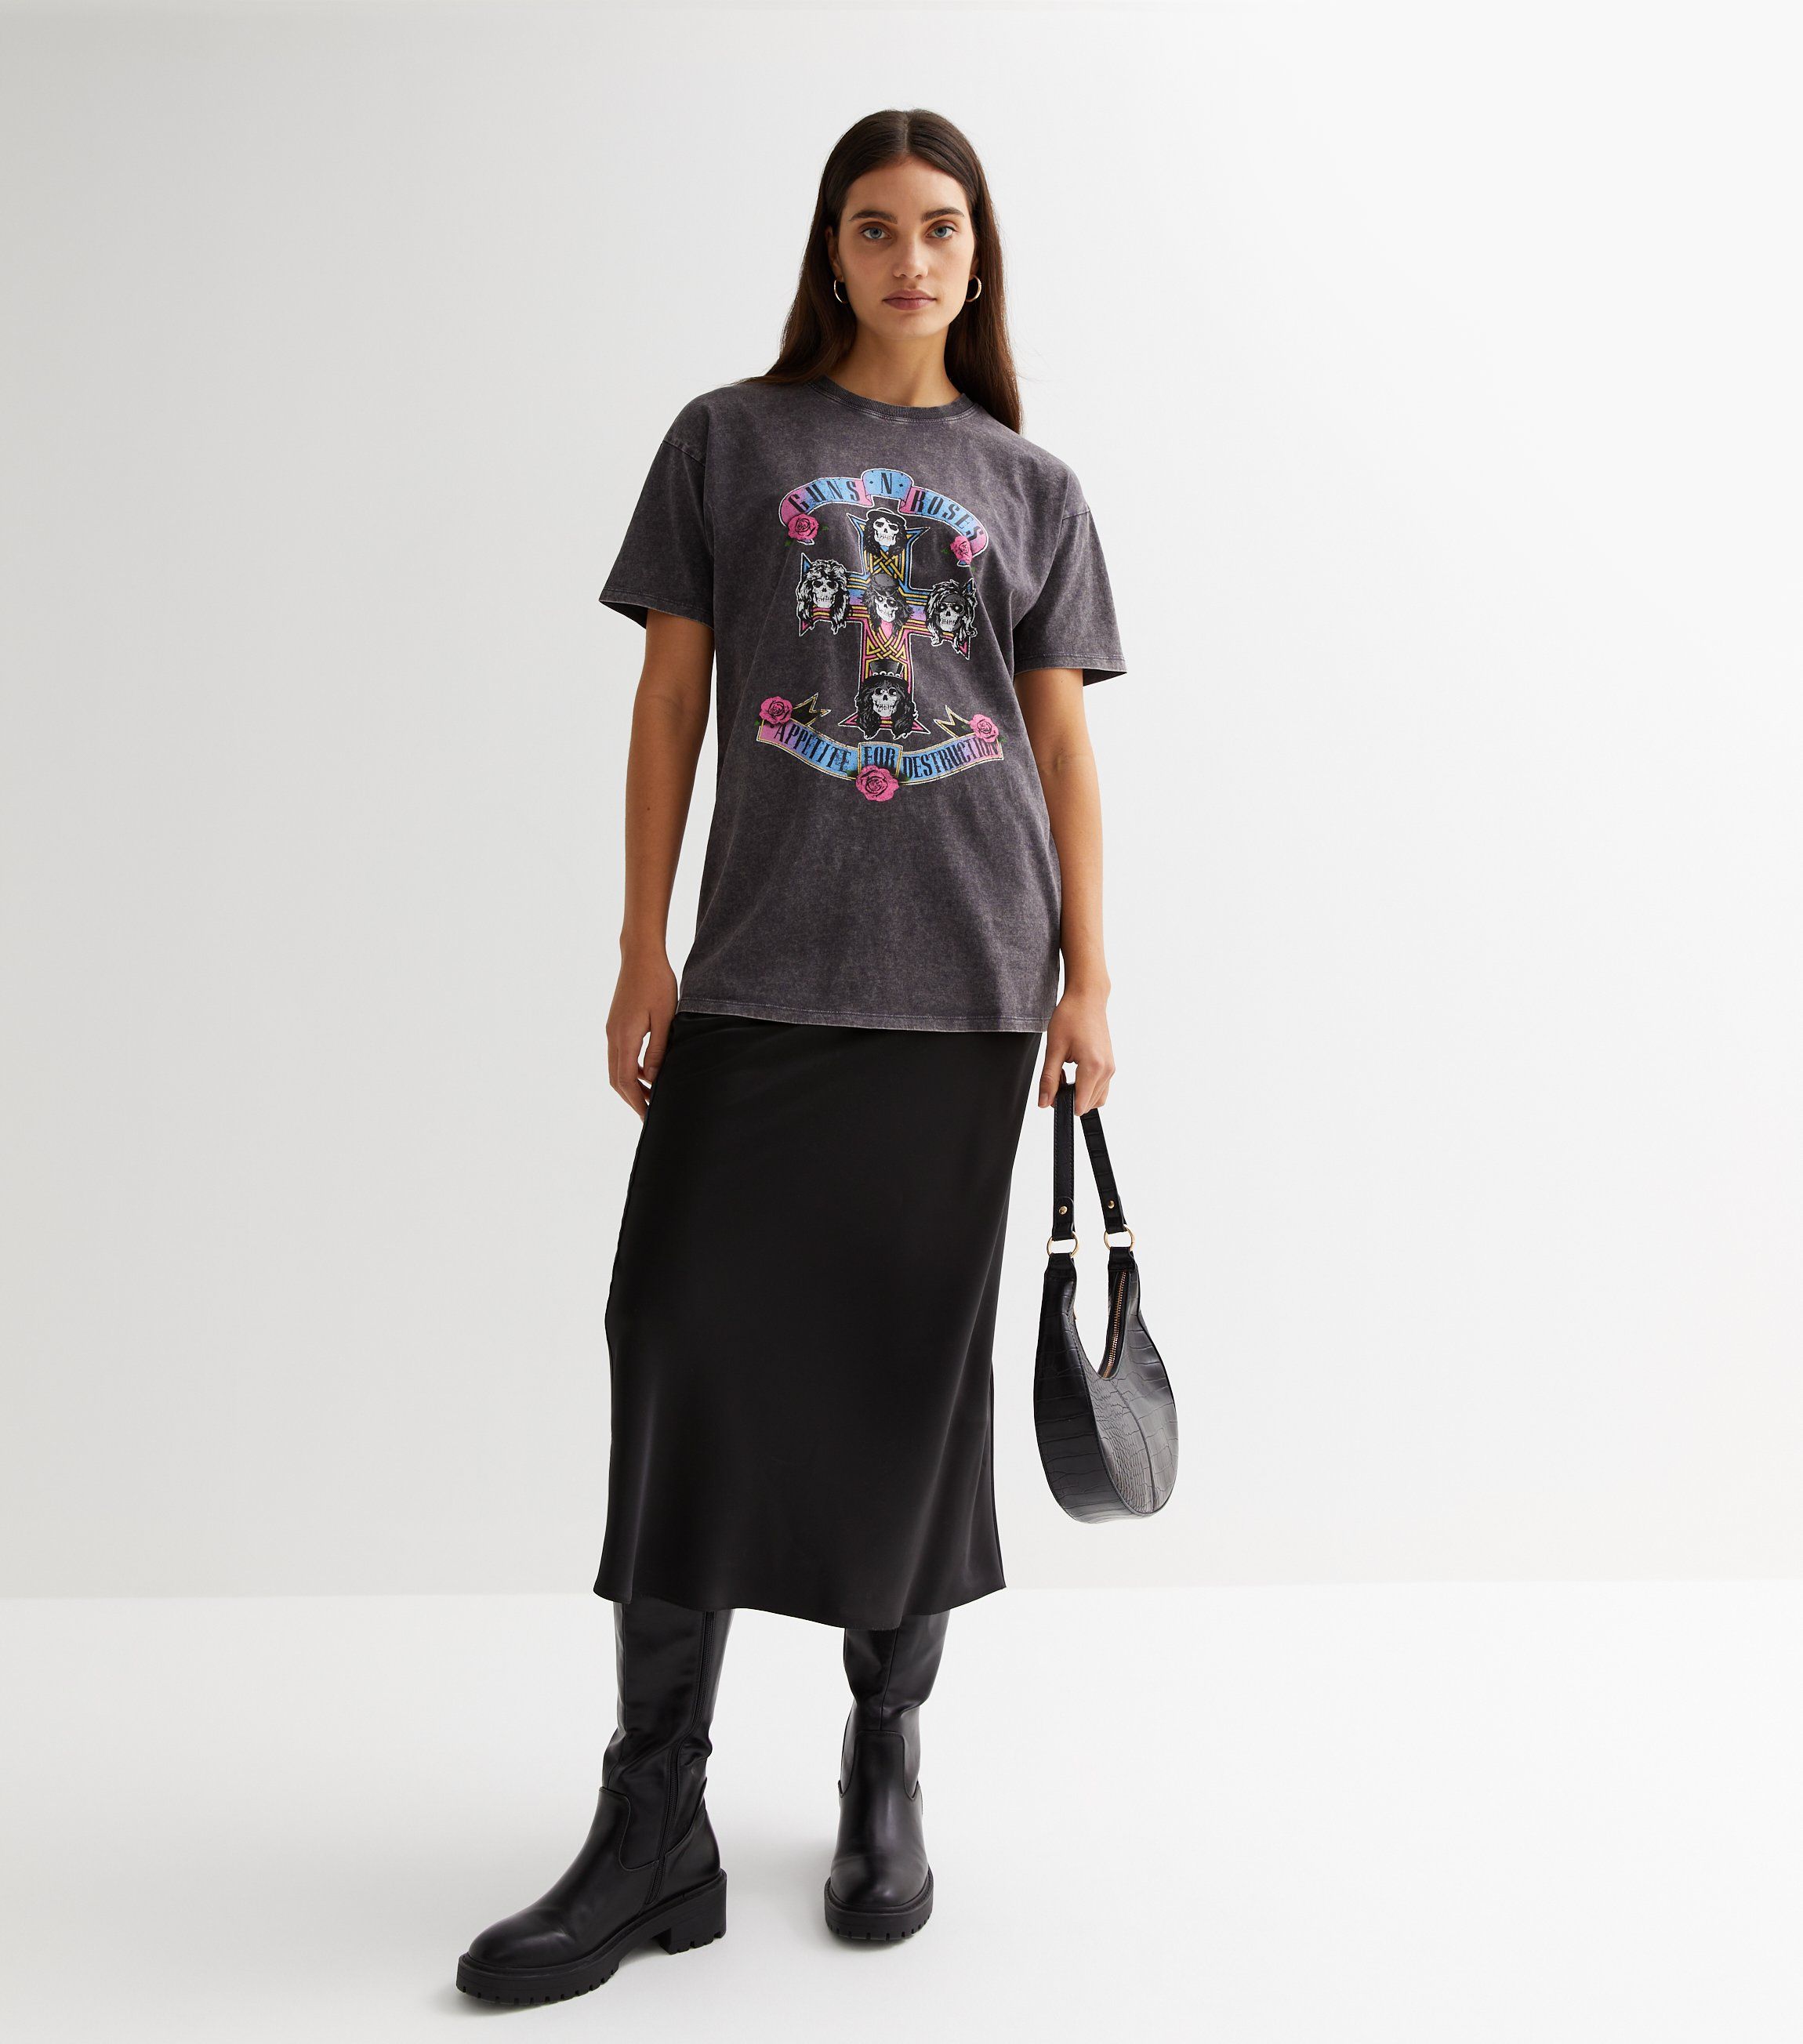 Oversized guns n roses t-shirt from new look